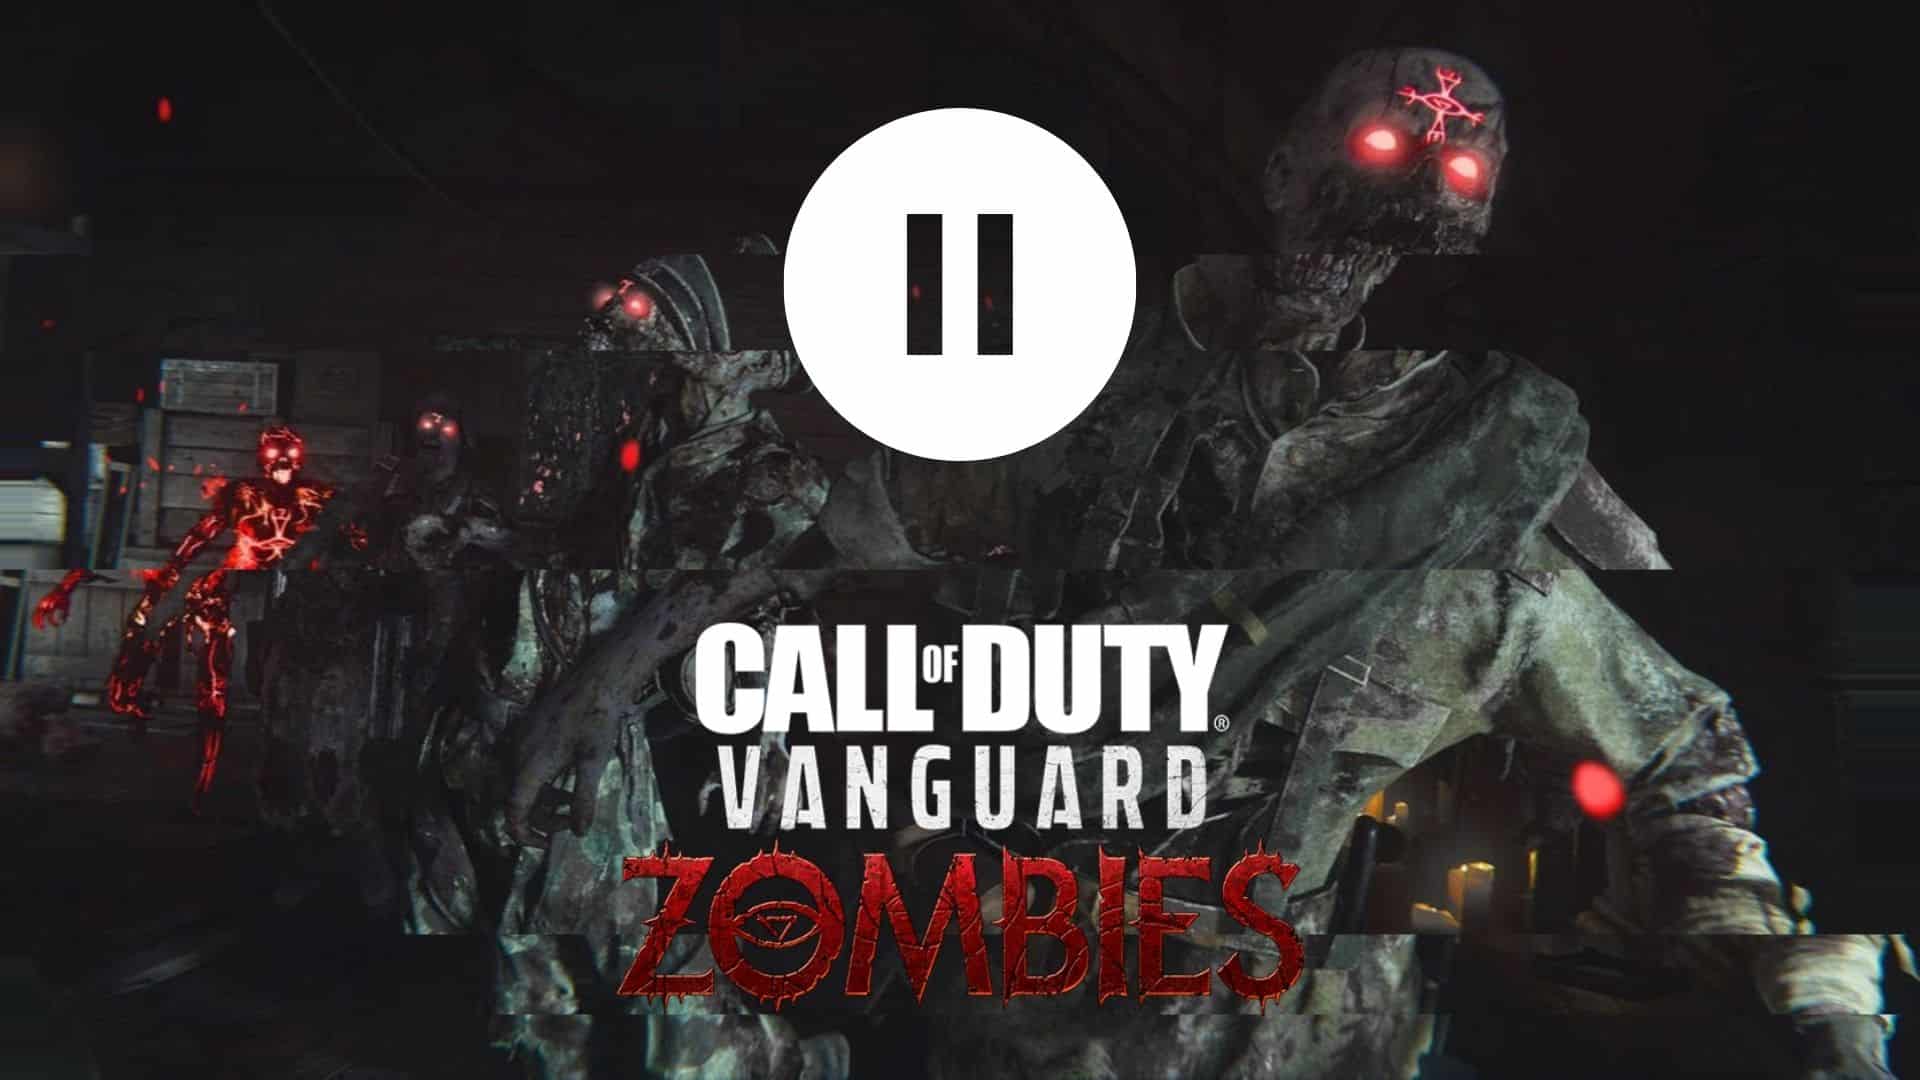 Vanguard Zombies: Is there Call of Duty Split Screen and can I pause?, Gaming, Entertainment